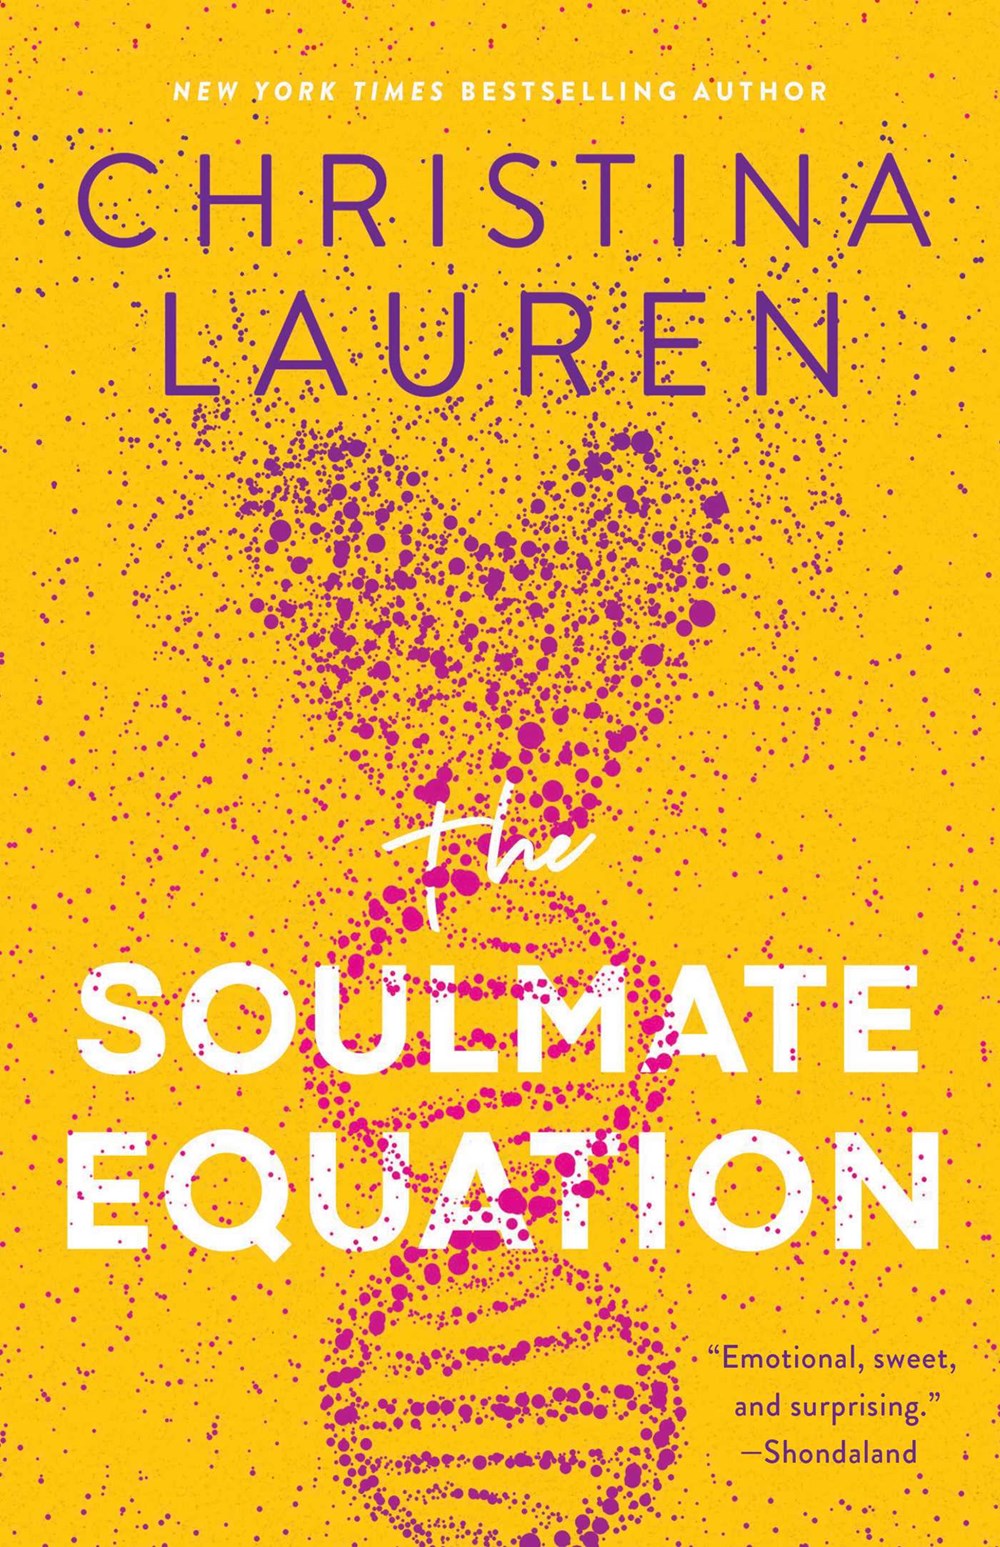 Read-Alikes for ‘The Soulmate Equation’ by Christina Lauren | LibraryReads